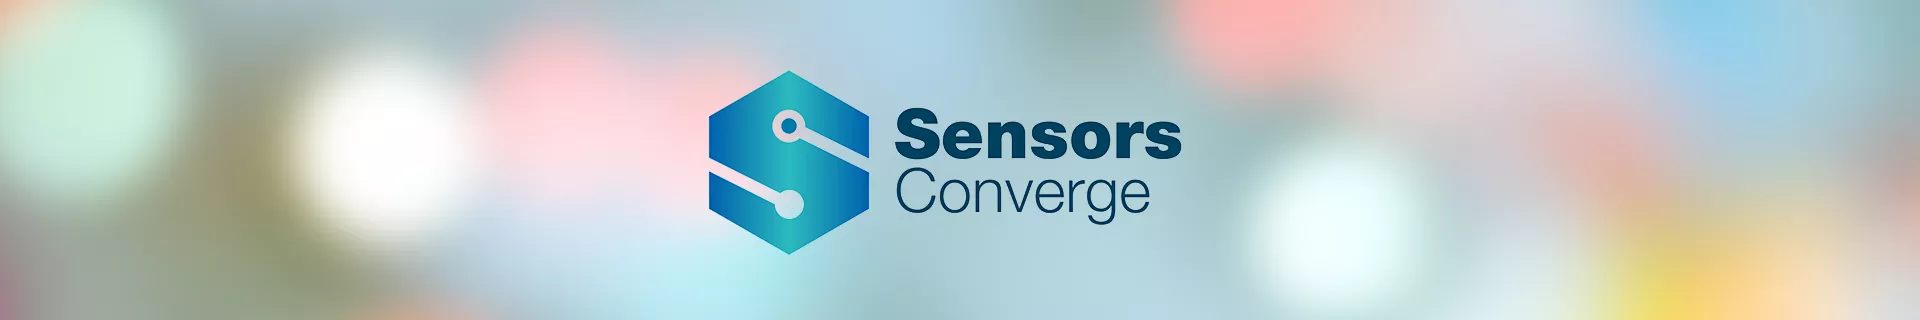 Header image for the event Sensors Converge